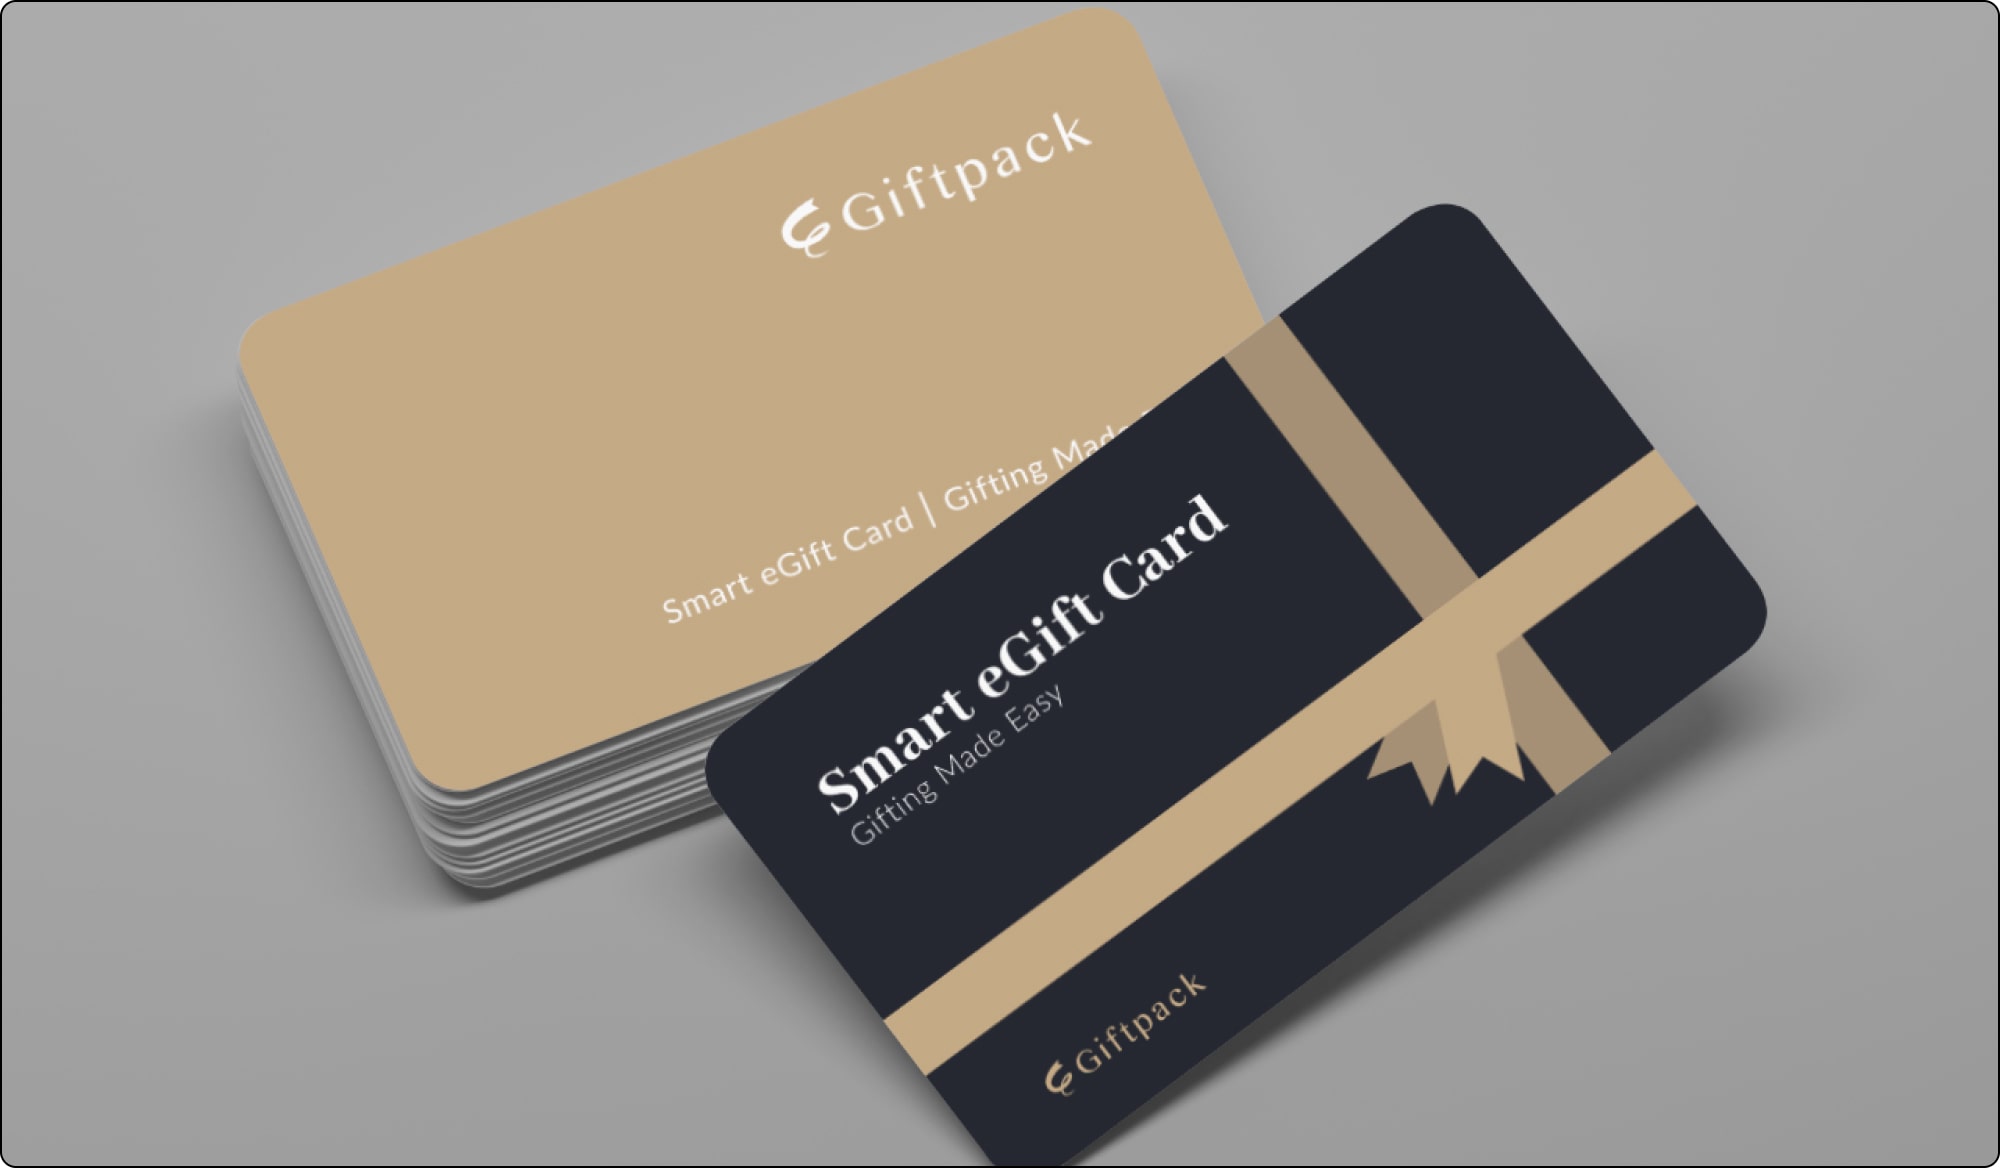 giftpack smart egift card for 350 brands for funny employee appreciation gifts